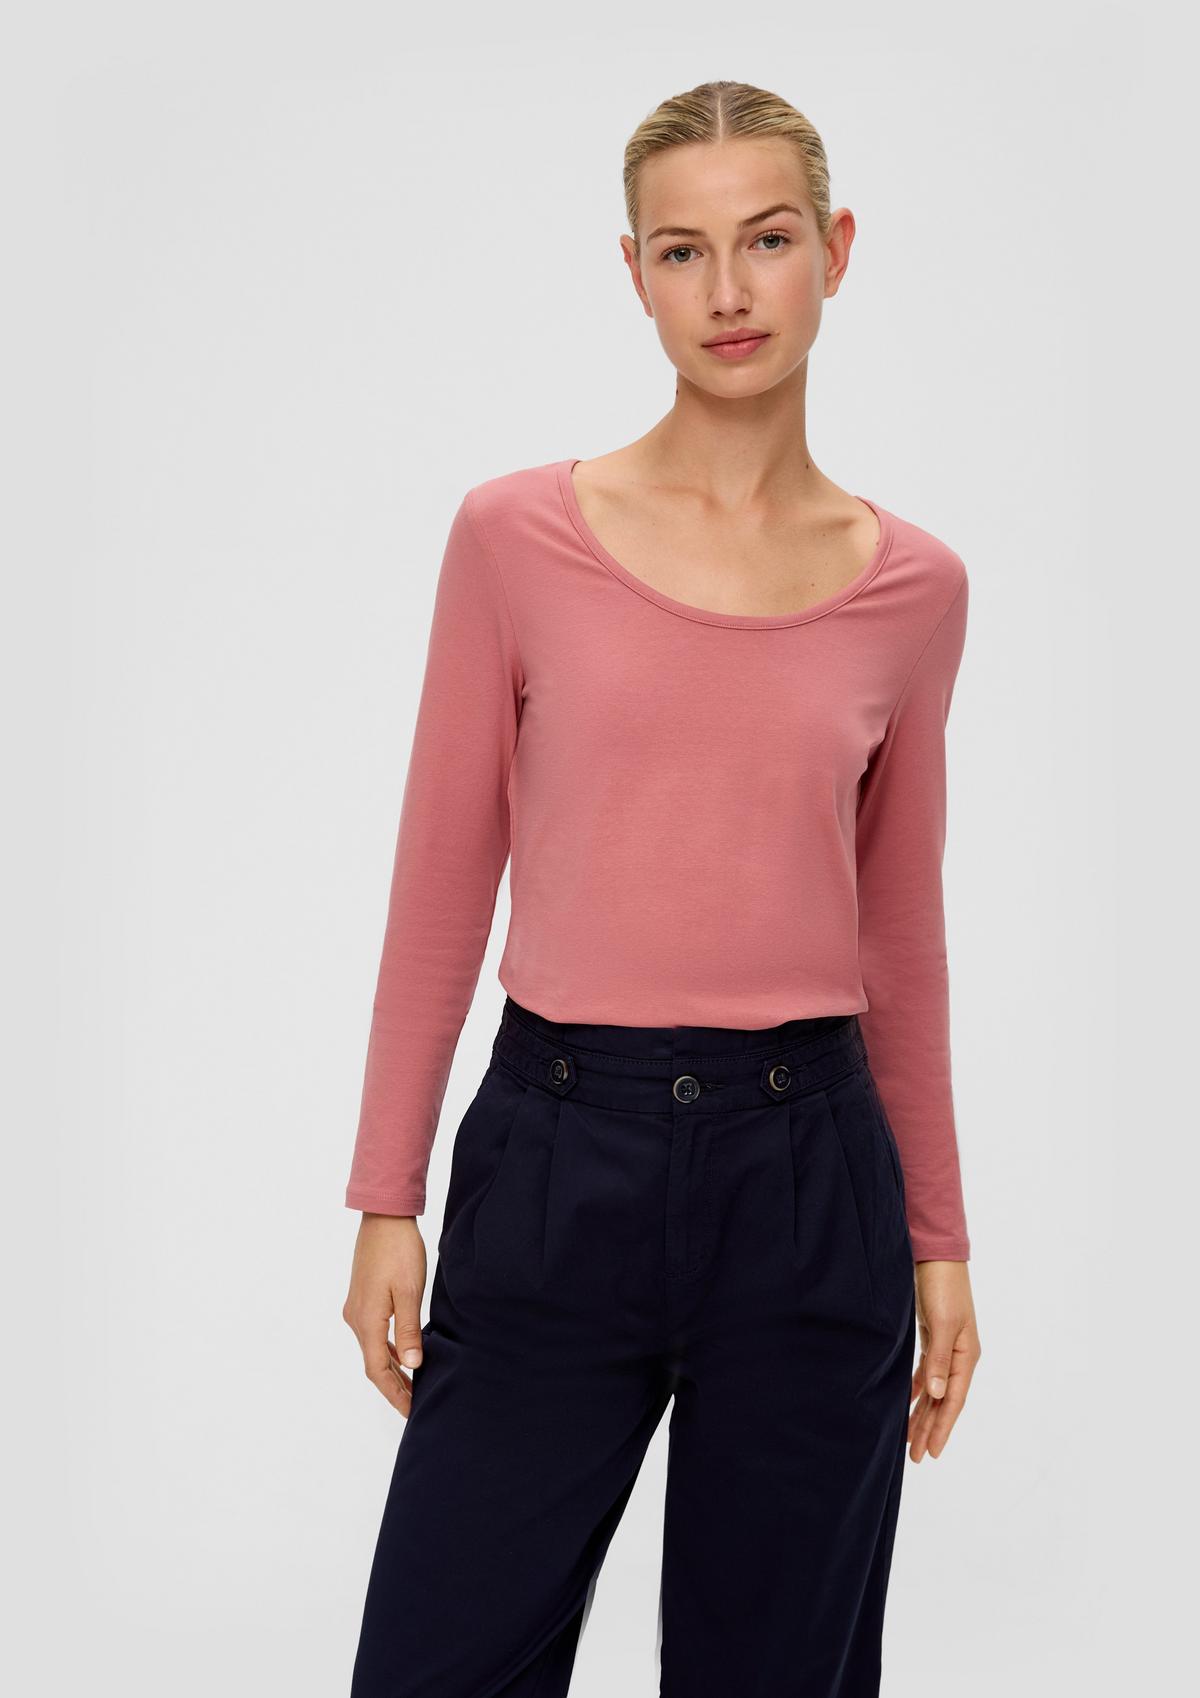 Long sleeve top made of stretch cotton